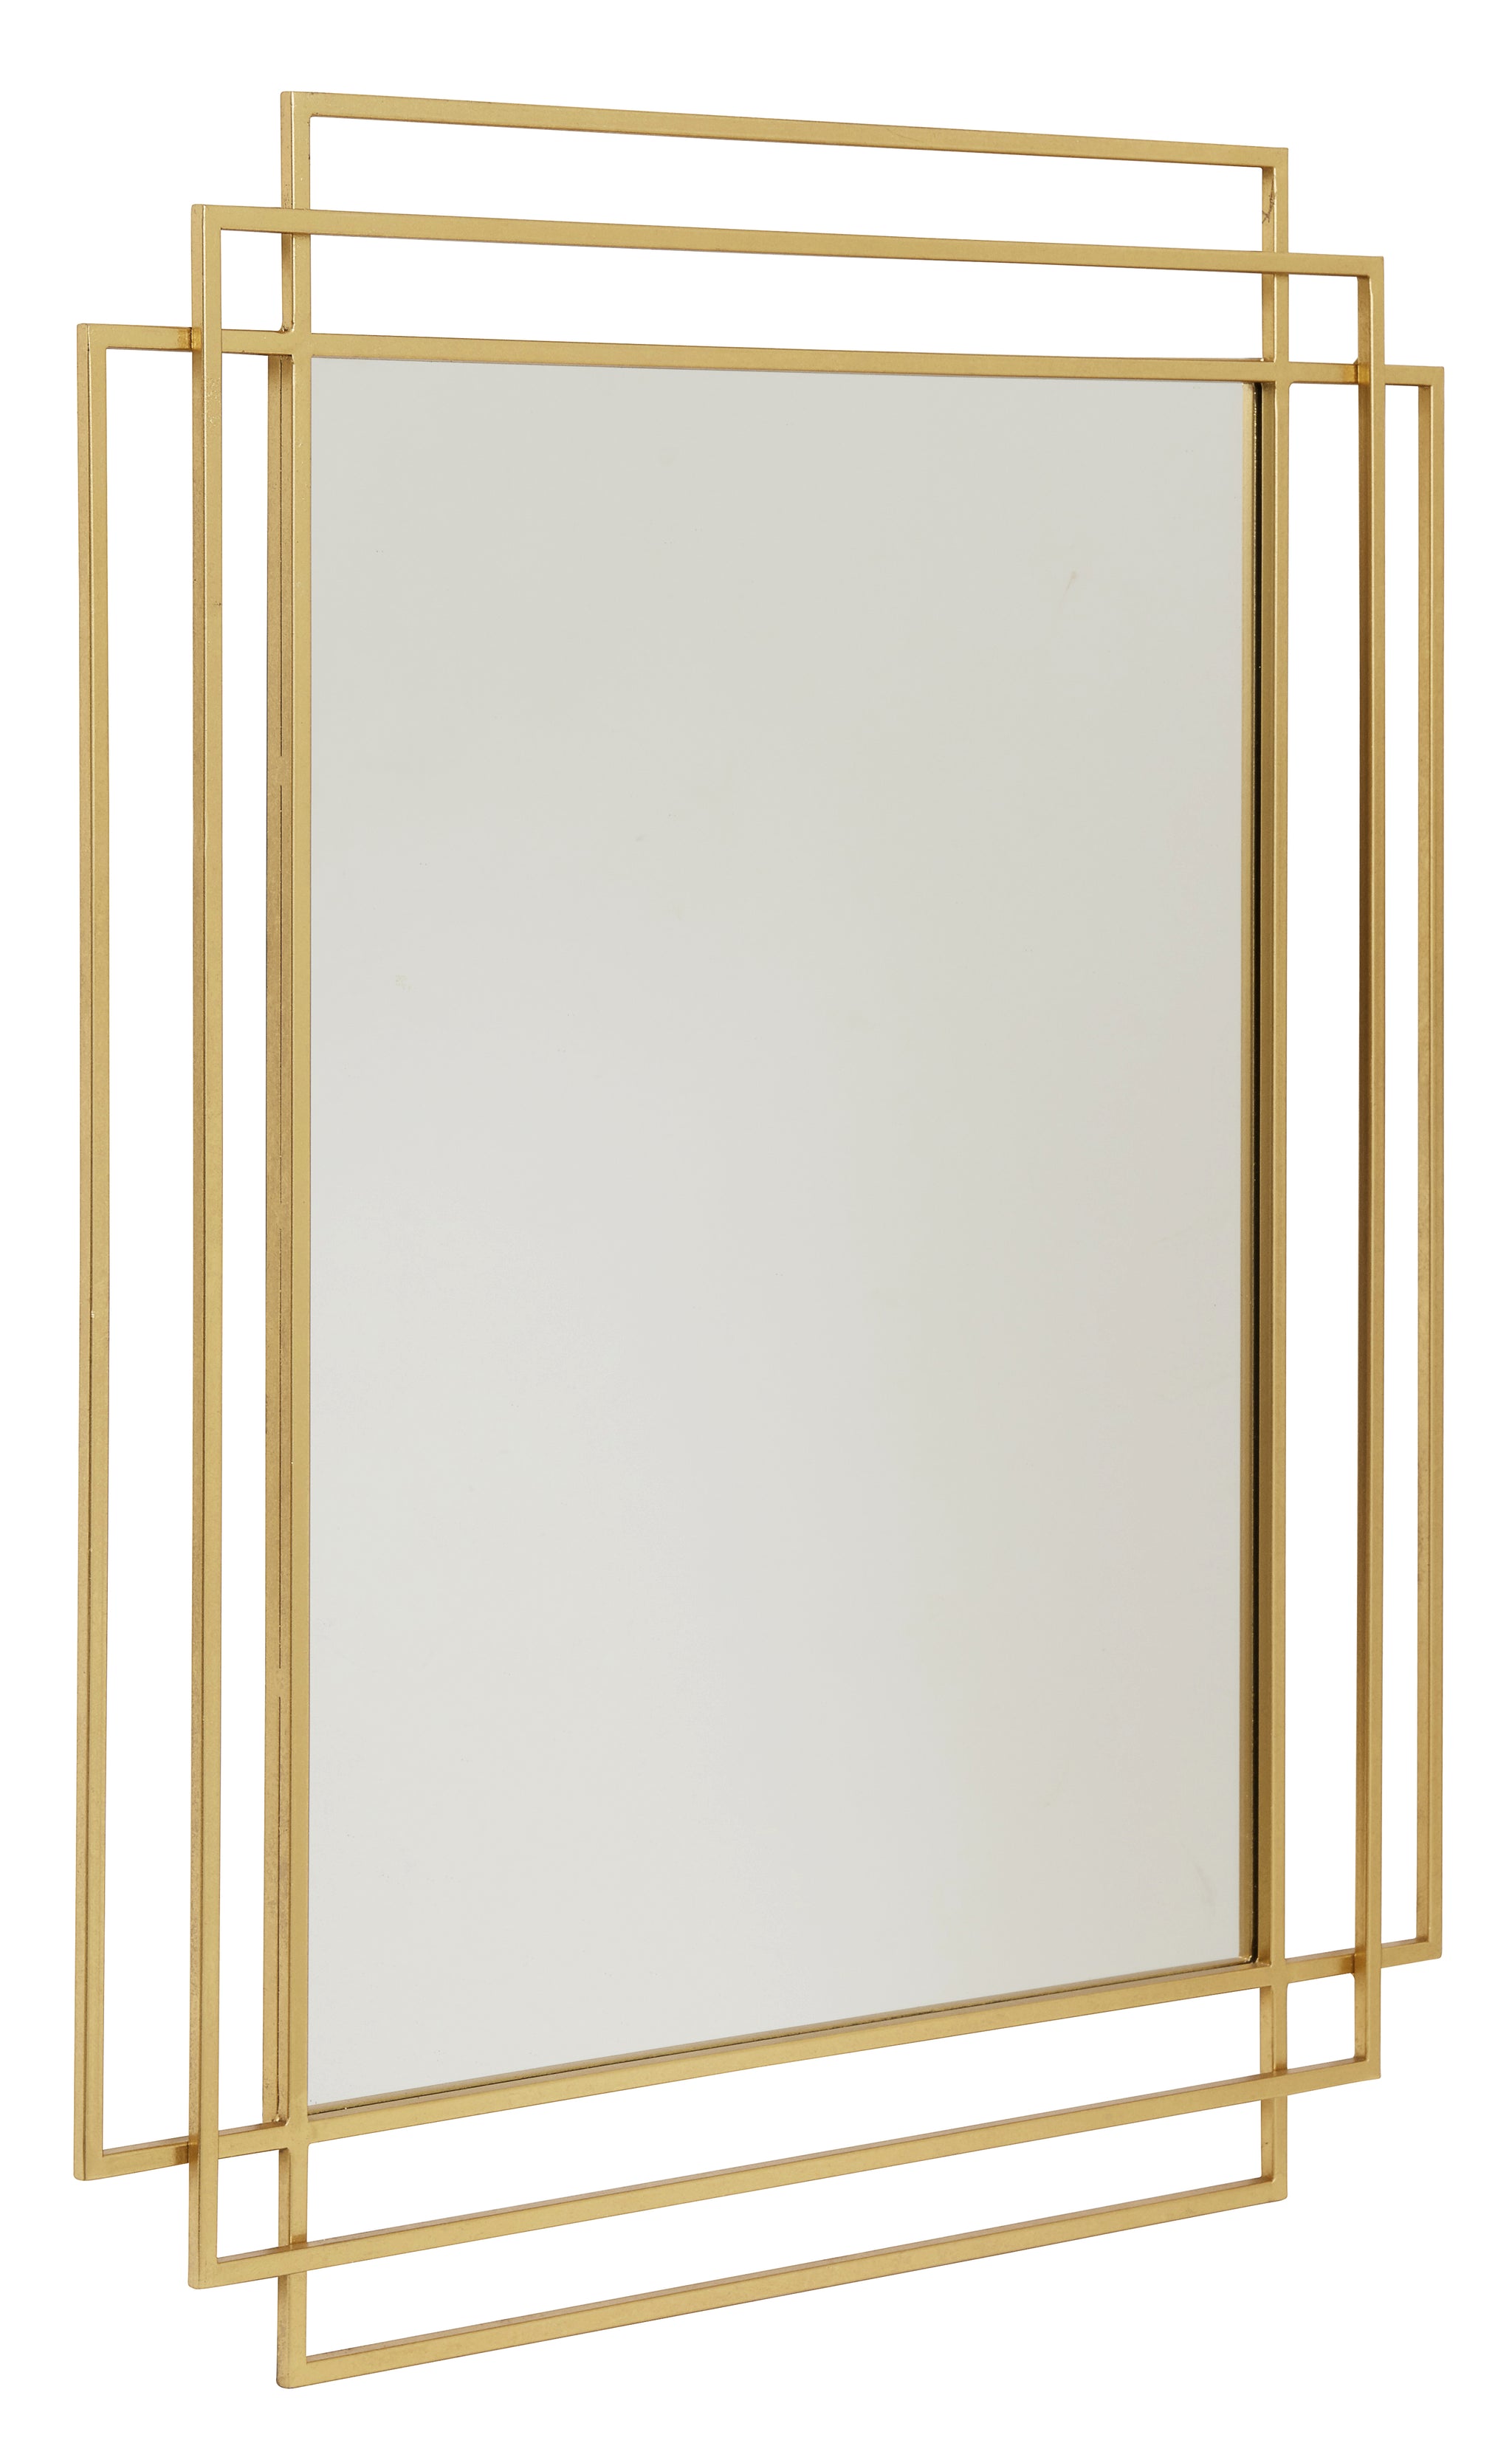 Golden Square Tiered Mirror - The Forest & Co.